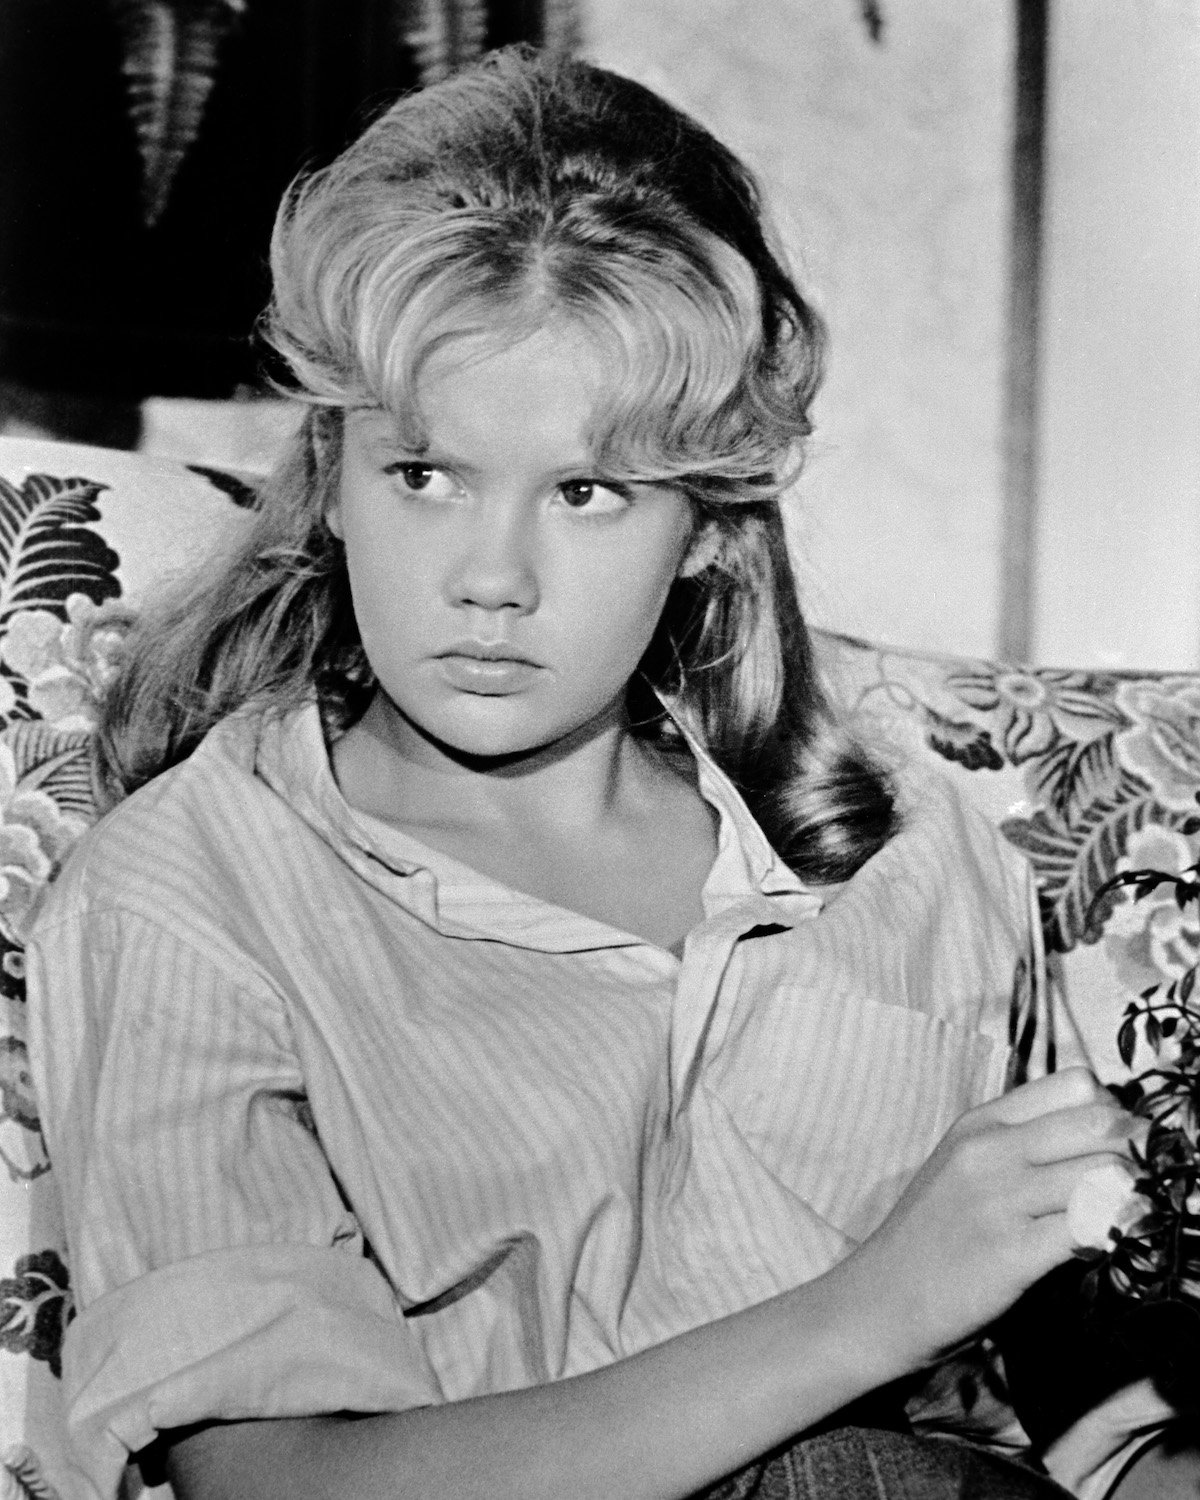 Hayley Mills in black and white.